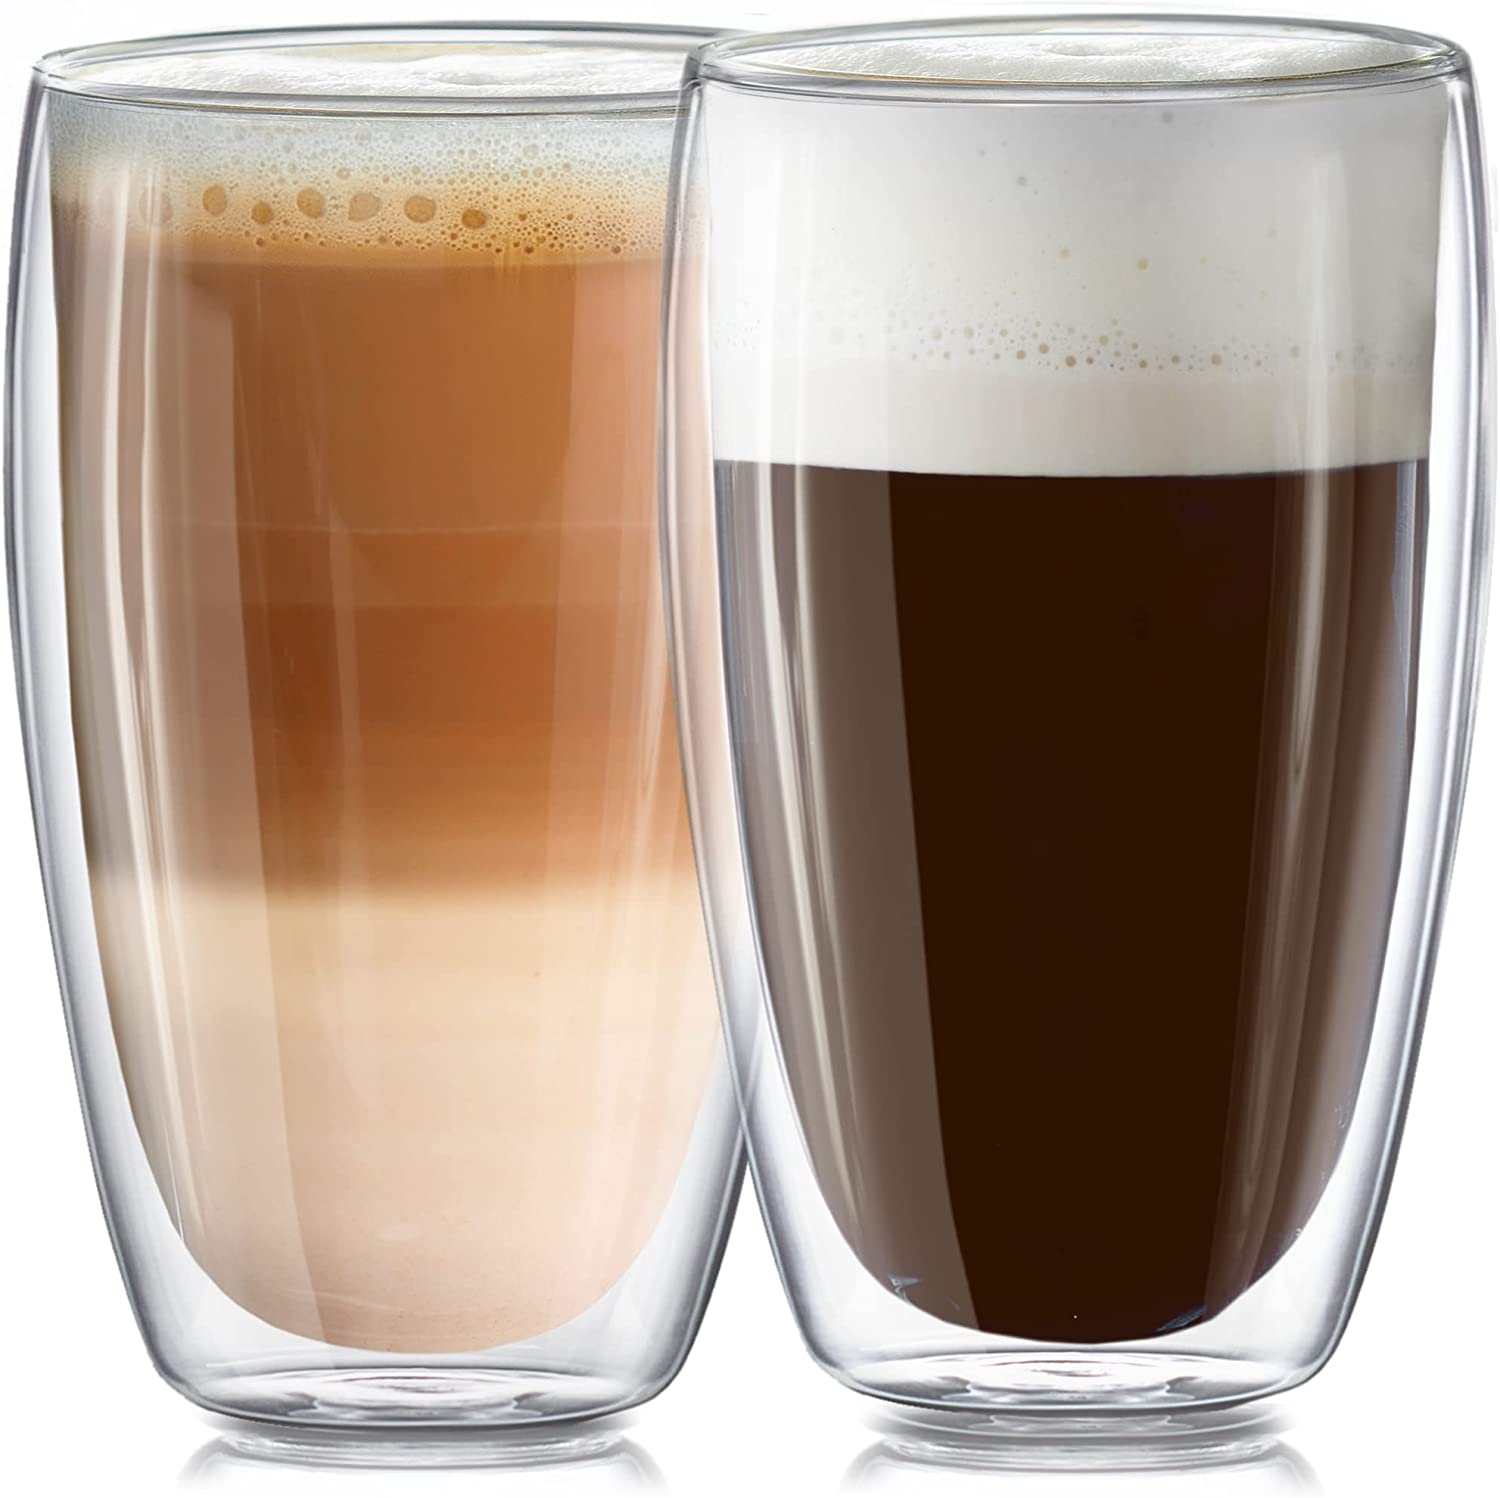 Sweese 416.101 Glass Coffee Mugs Set of 2 - Double Wall Tall Insulated Tea  Cup with Handle Glassware, Perfect for Cappuccino, Latte, Macchiato, Tea